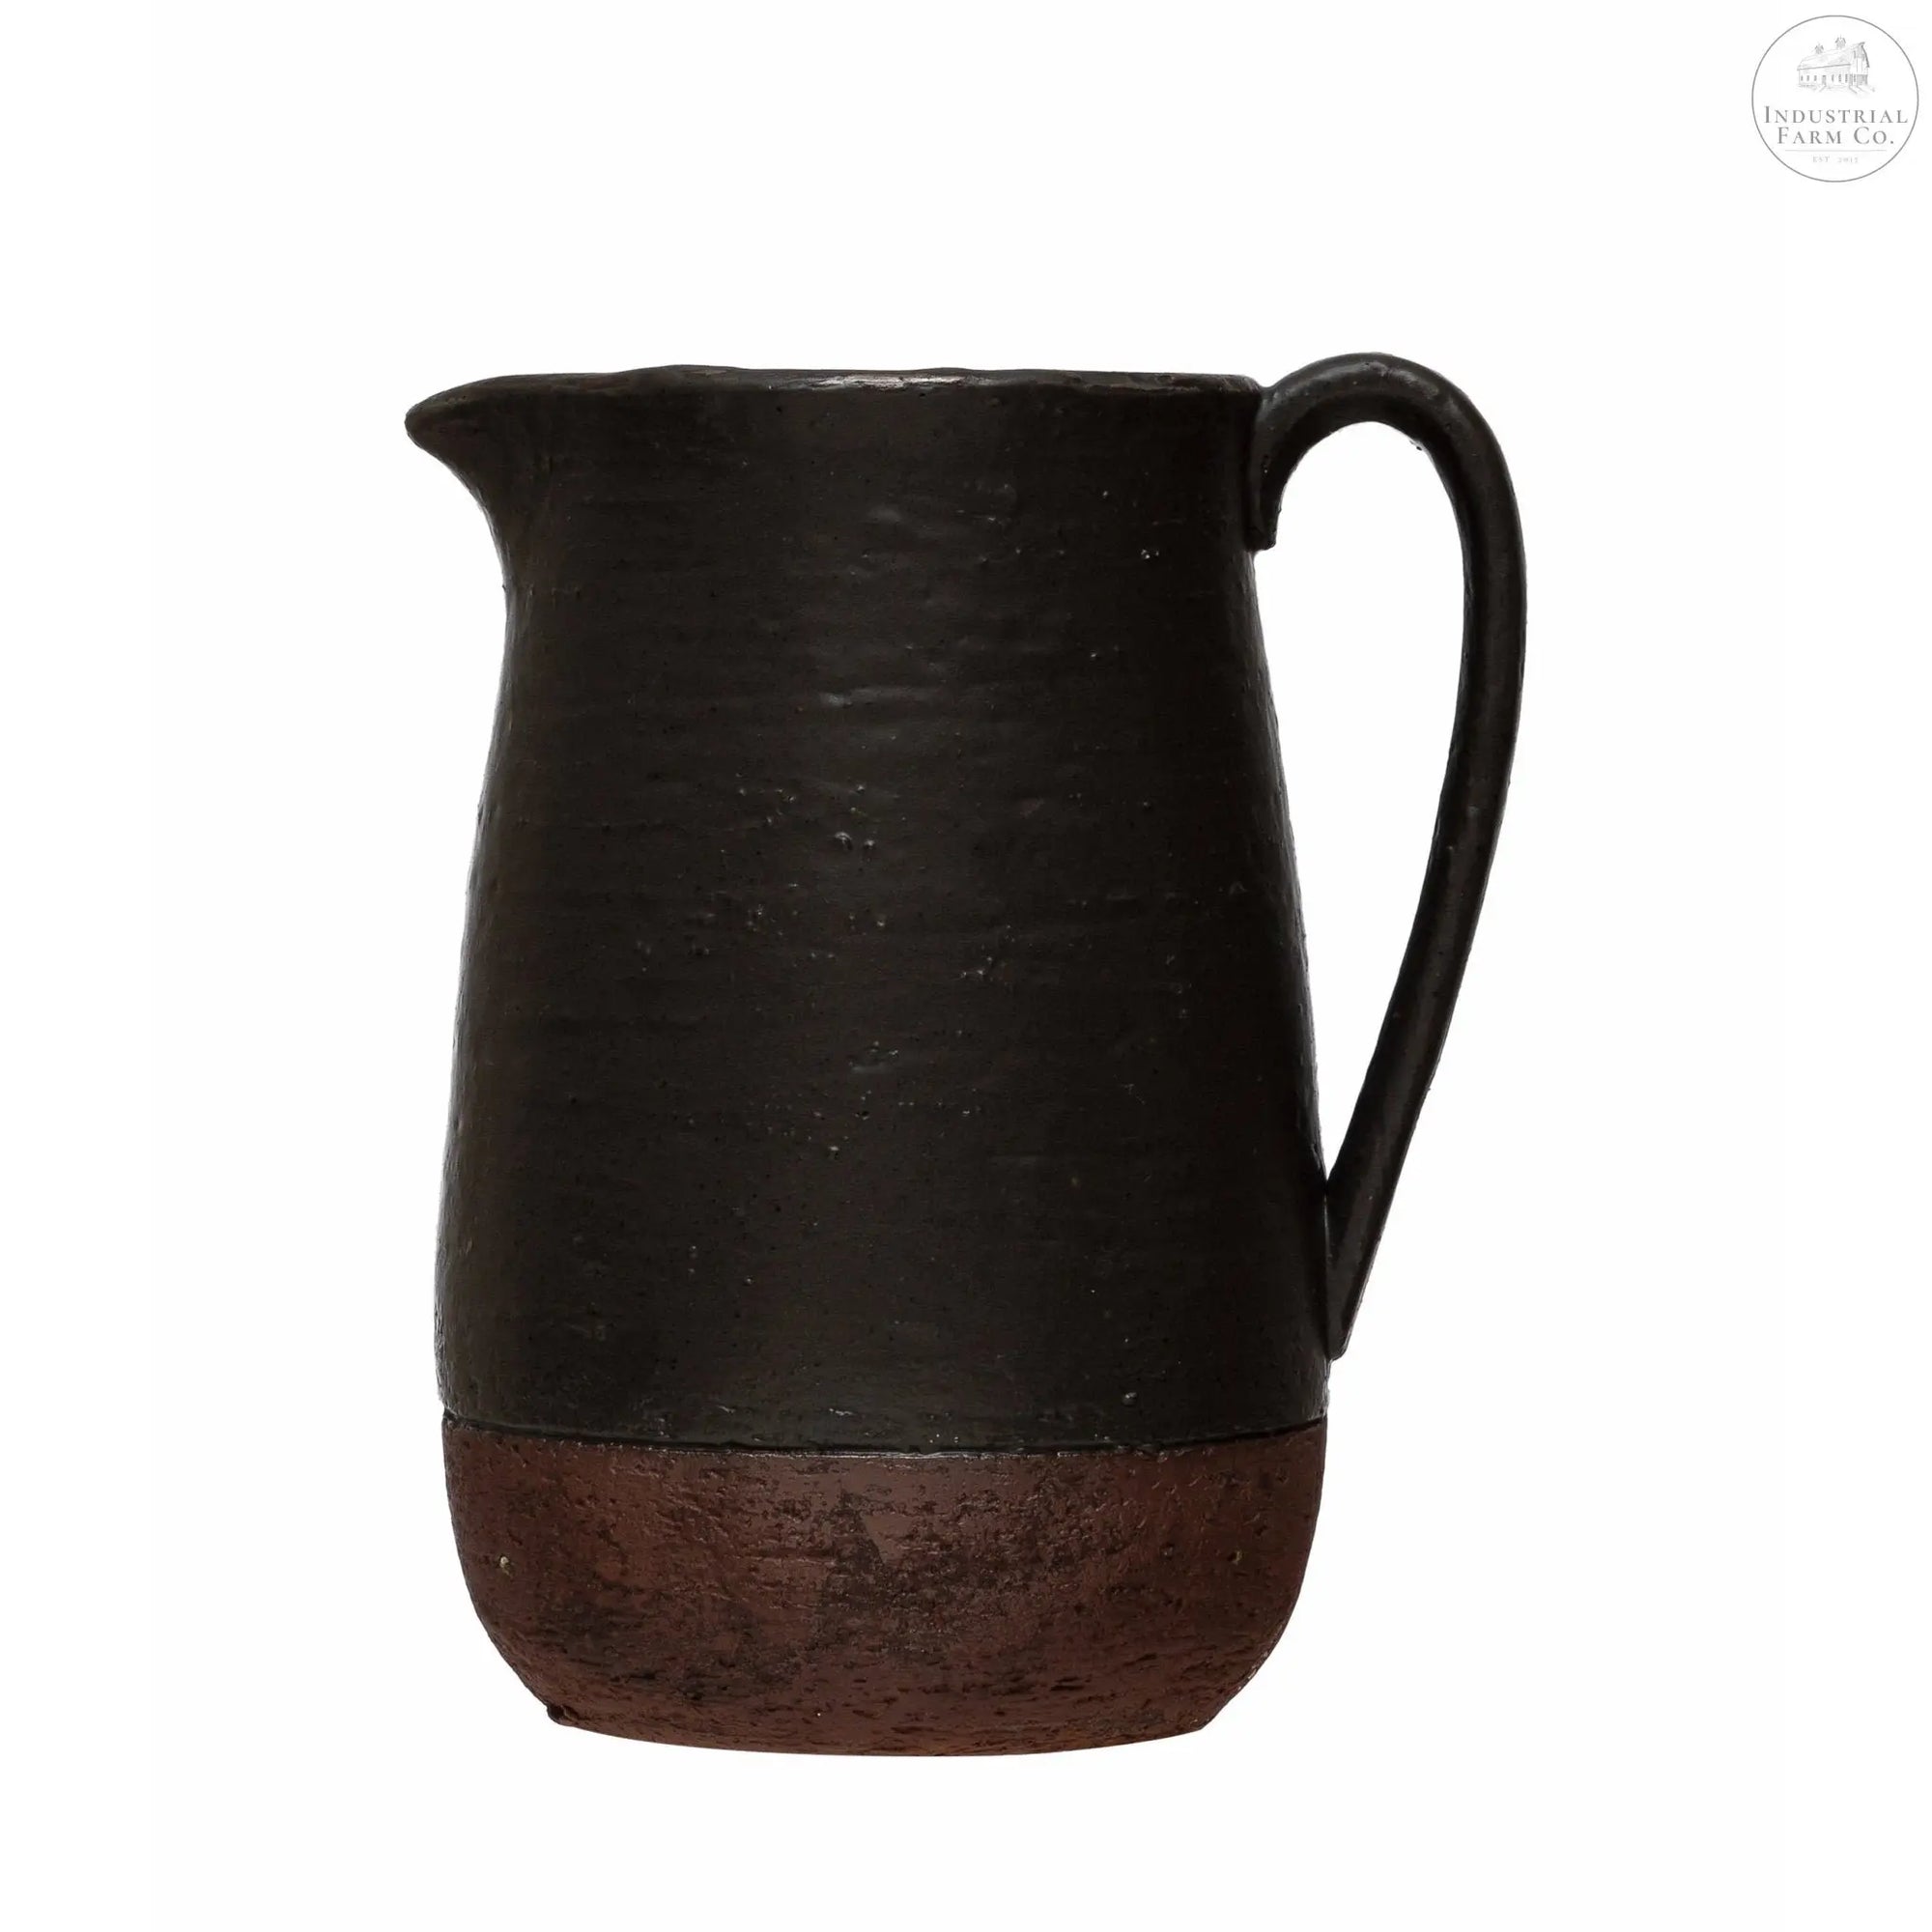 The Black Stoneware Pitcher Serving Pitchers & Carafes    | Industrial Farm Co